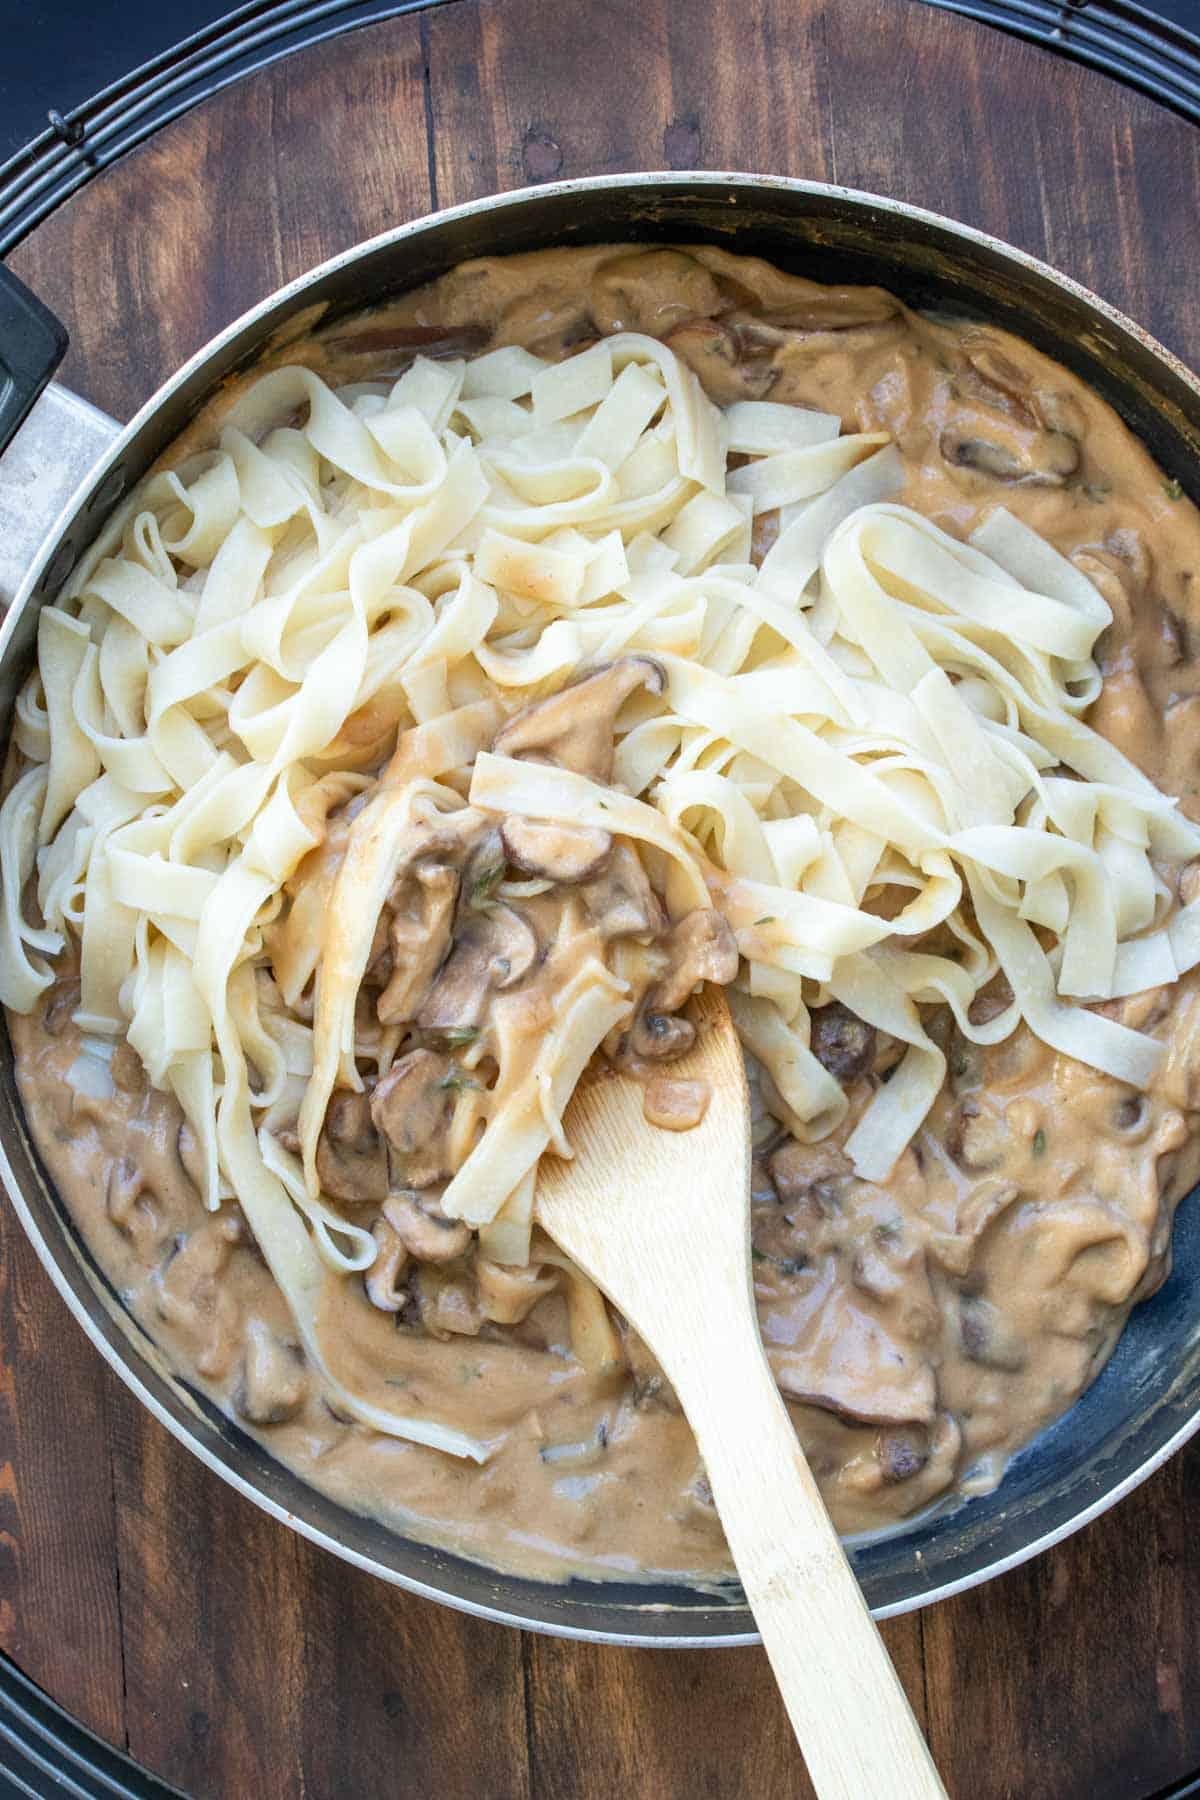 Fettuccini noodles bring mixed into a tan creamy sauce with mushrooms